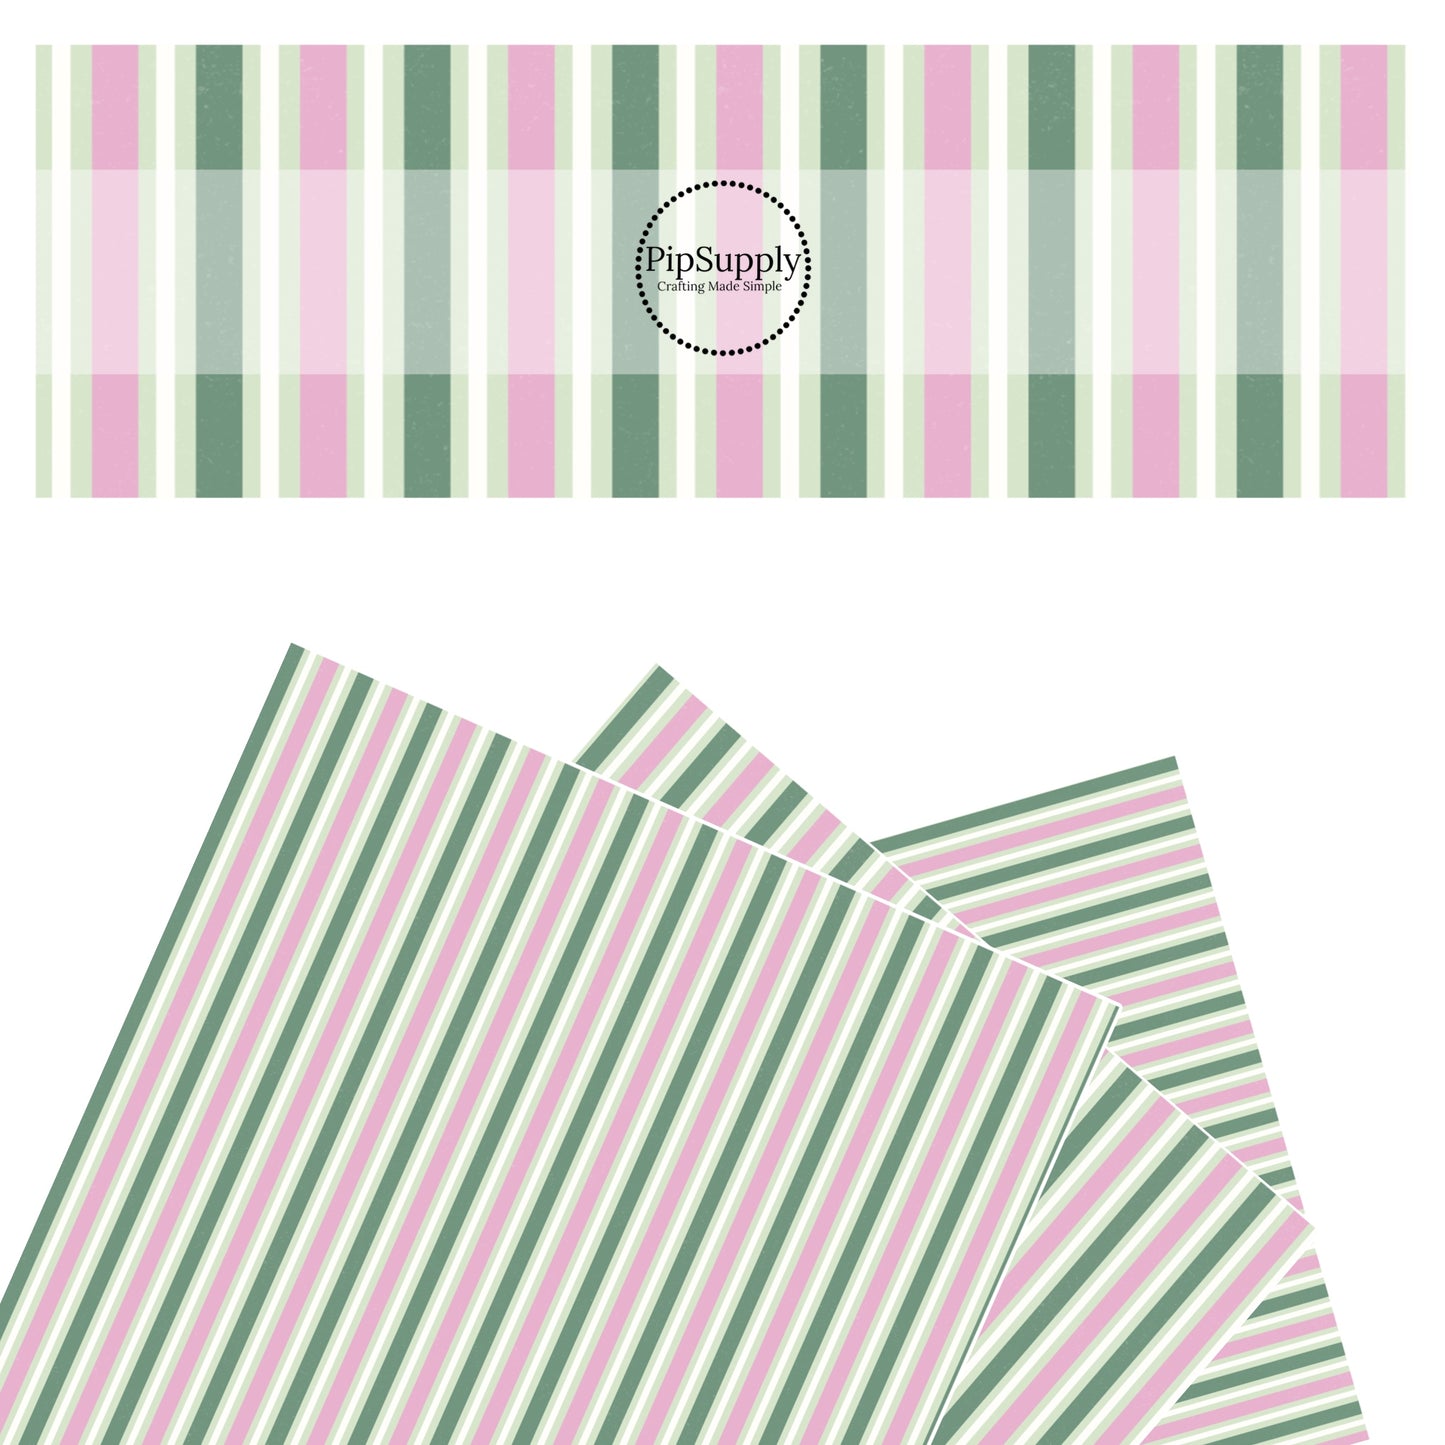 These St. Patrick's Day pattern themed faux leather sheets contain the following design elements: pink, cream, light green, and dark green stripes. Our CPSIA compliant faux leather sheets or rolls can be used for all types of crafting projects.